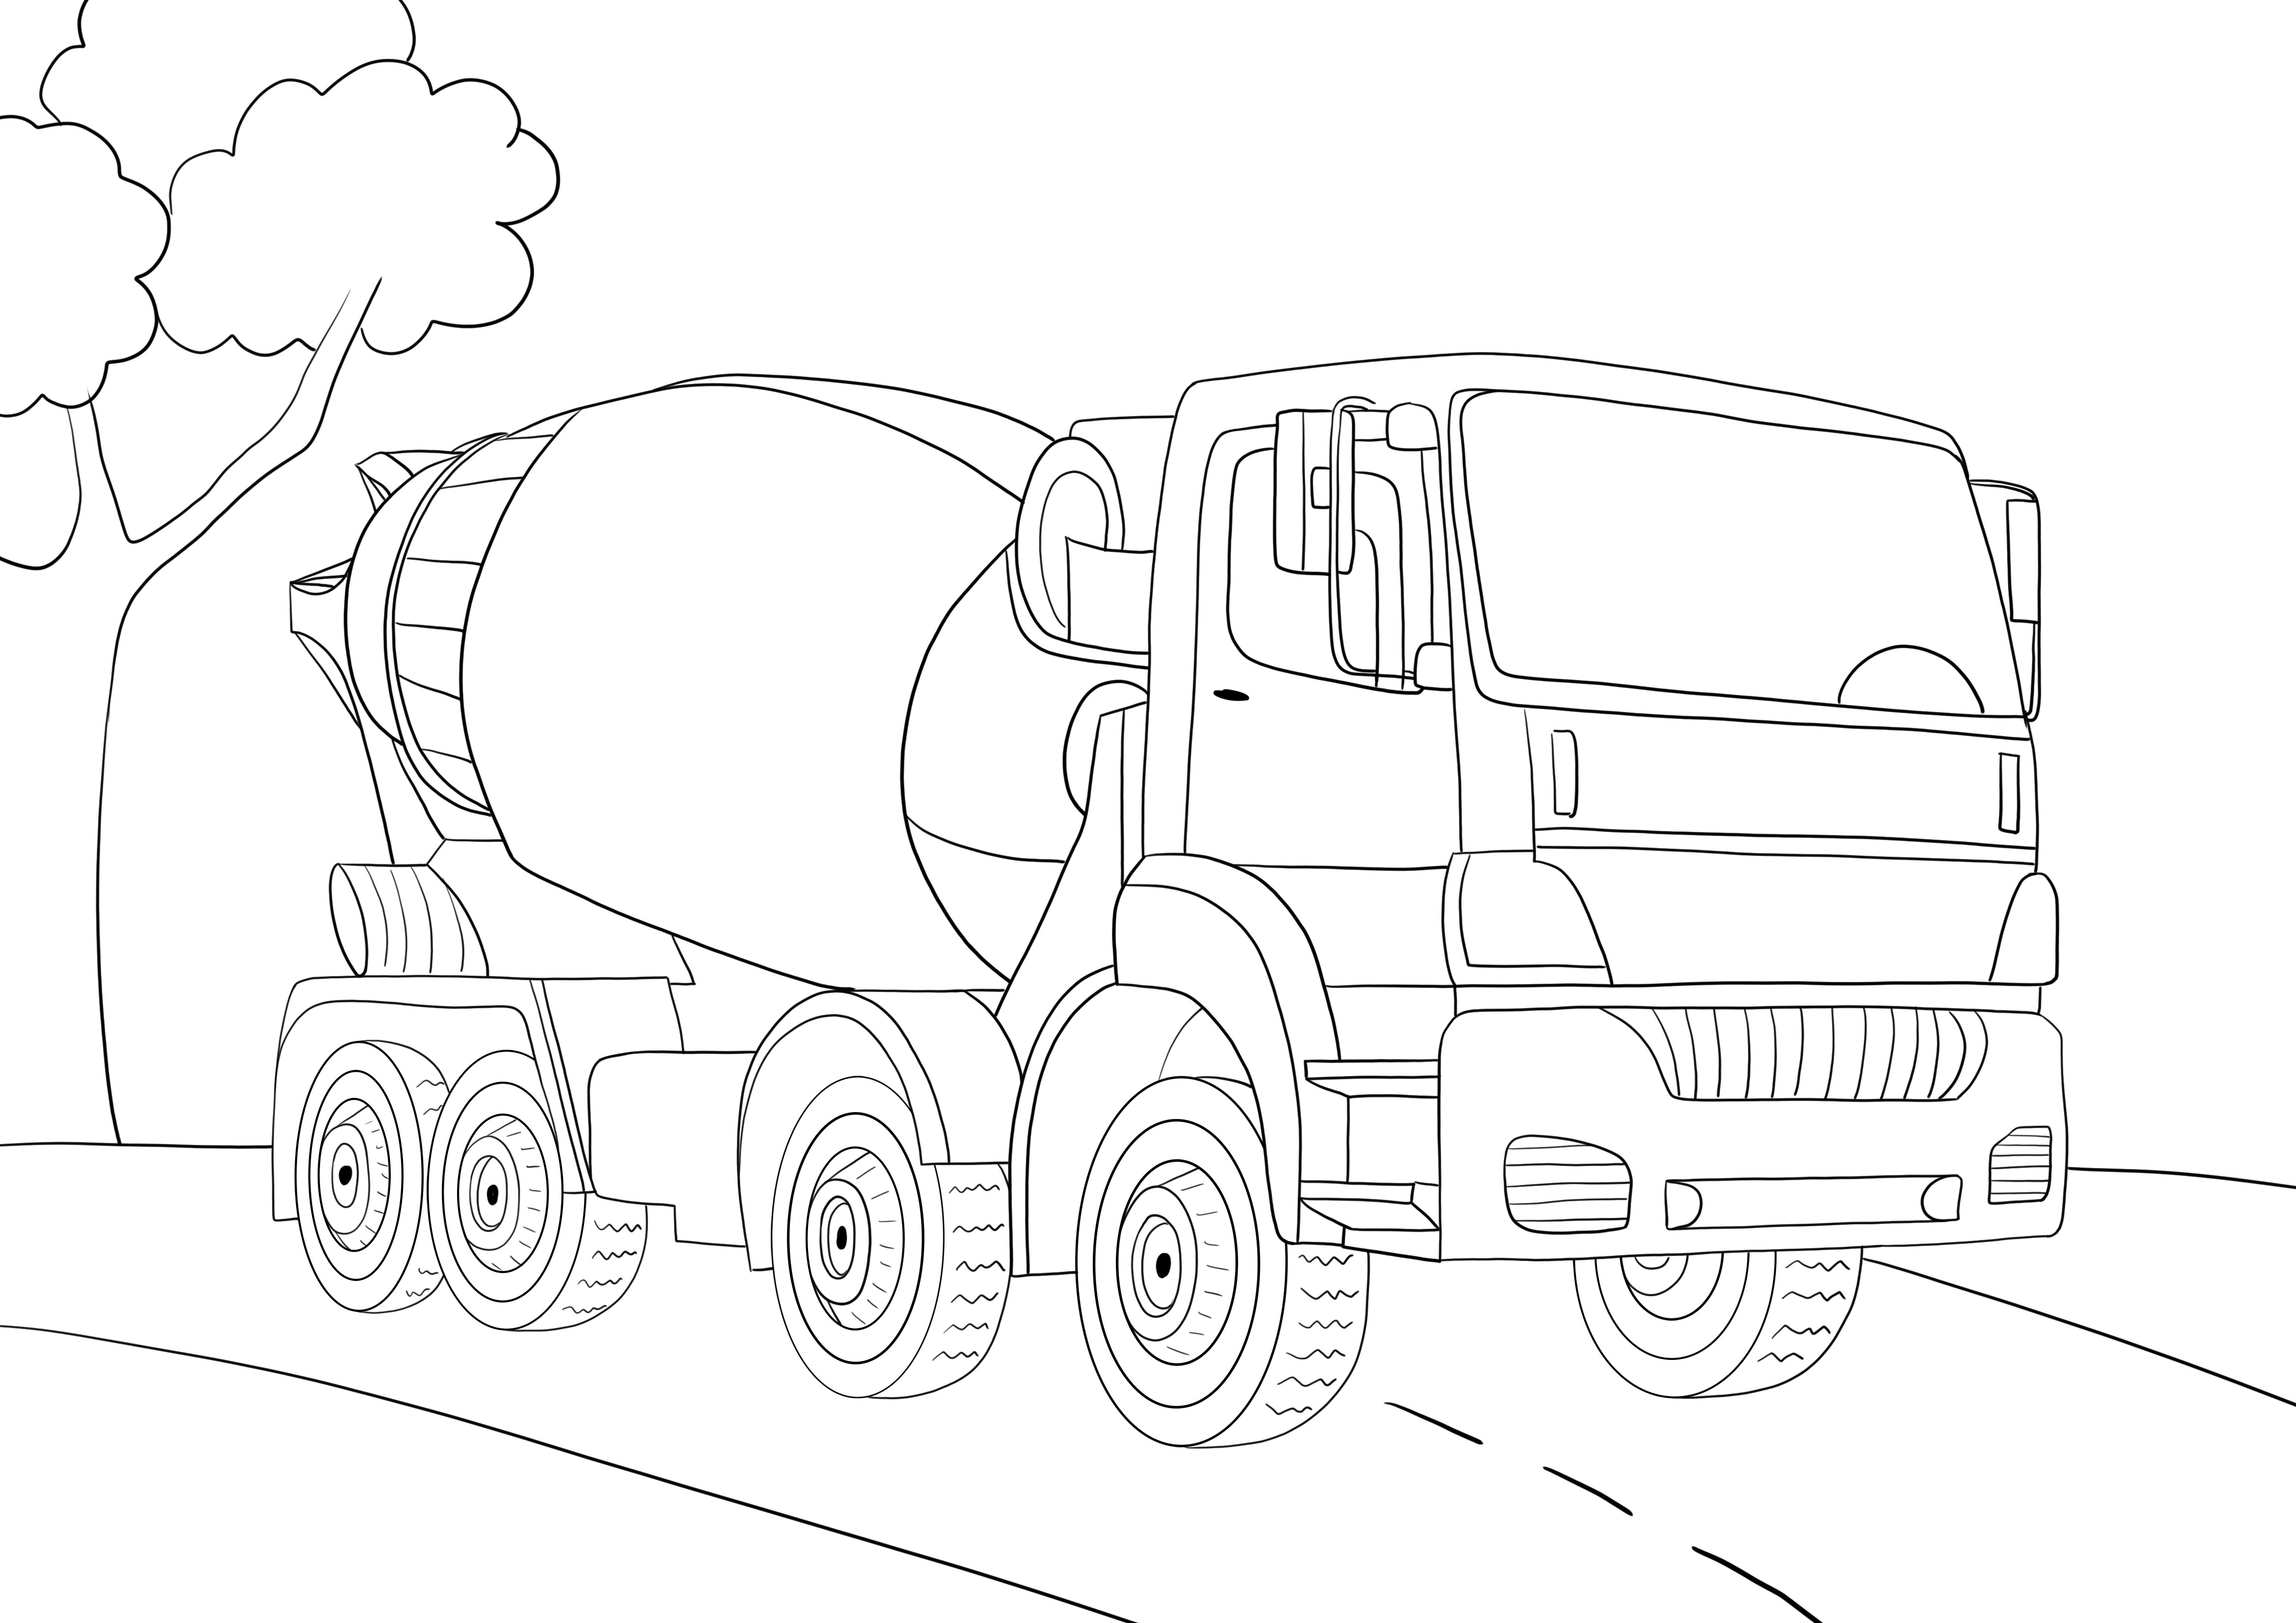 Cement truck free printable sheet for kids to color